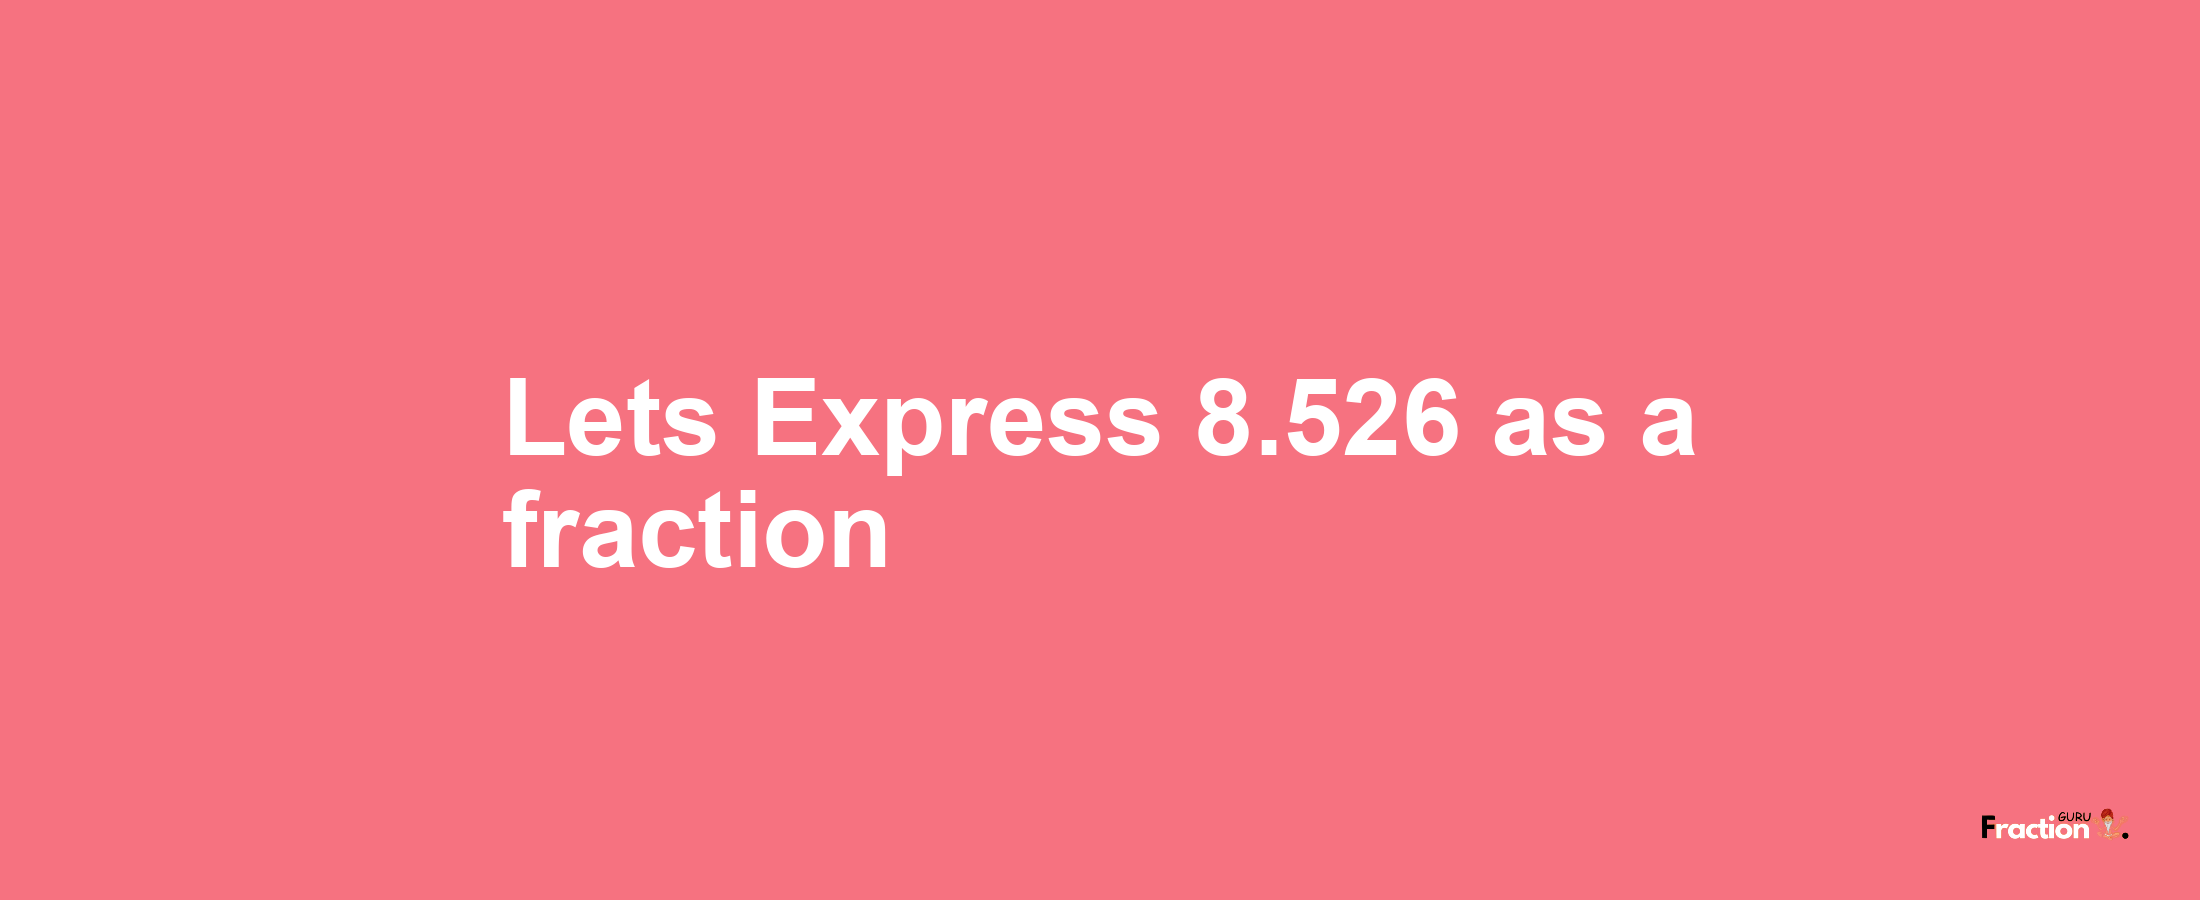 Lets Express 8.526 as afraction